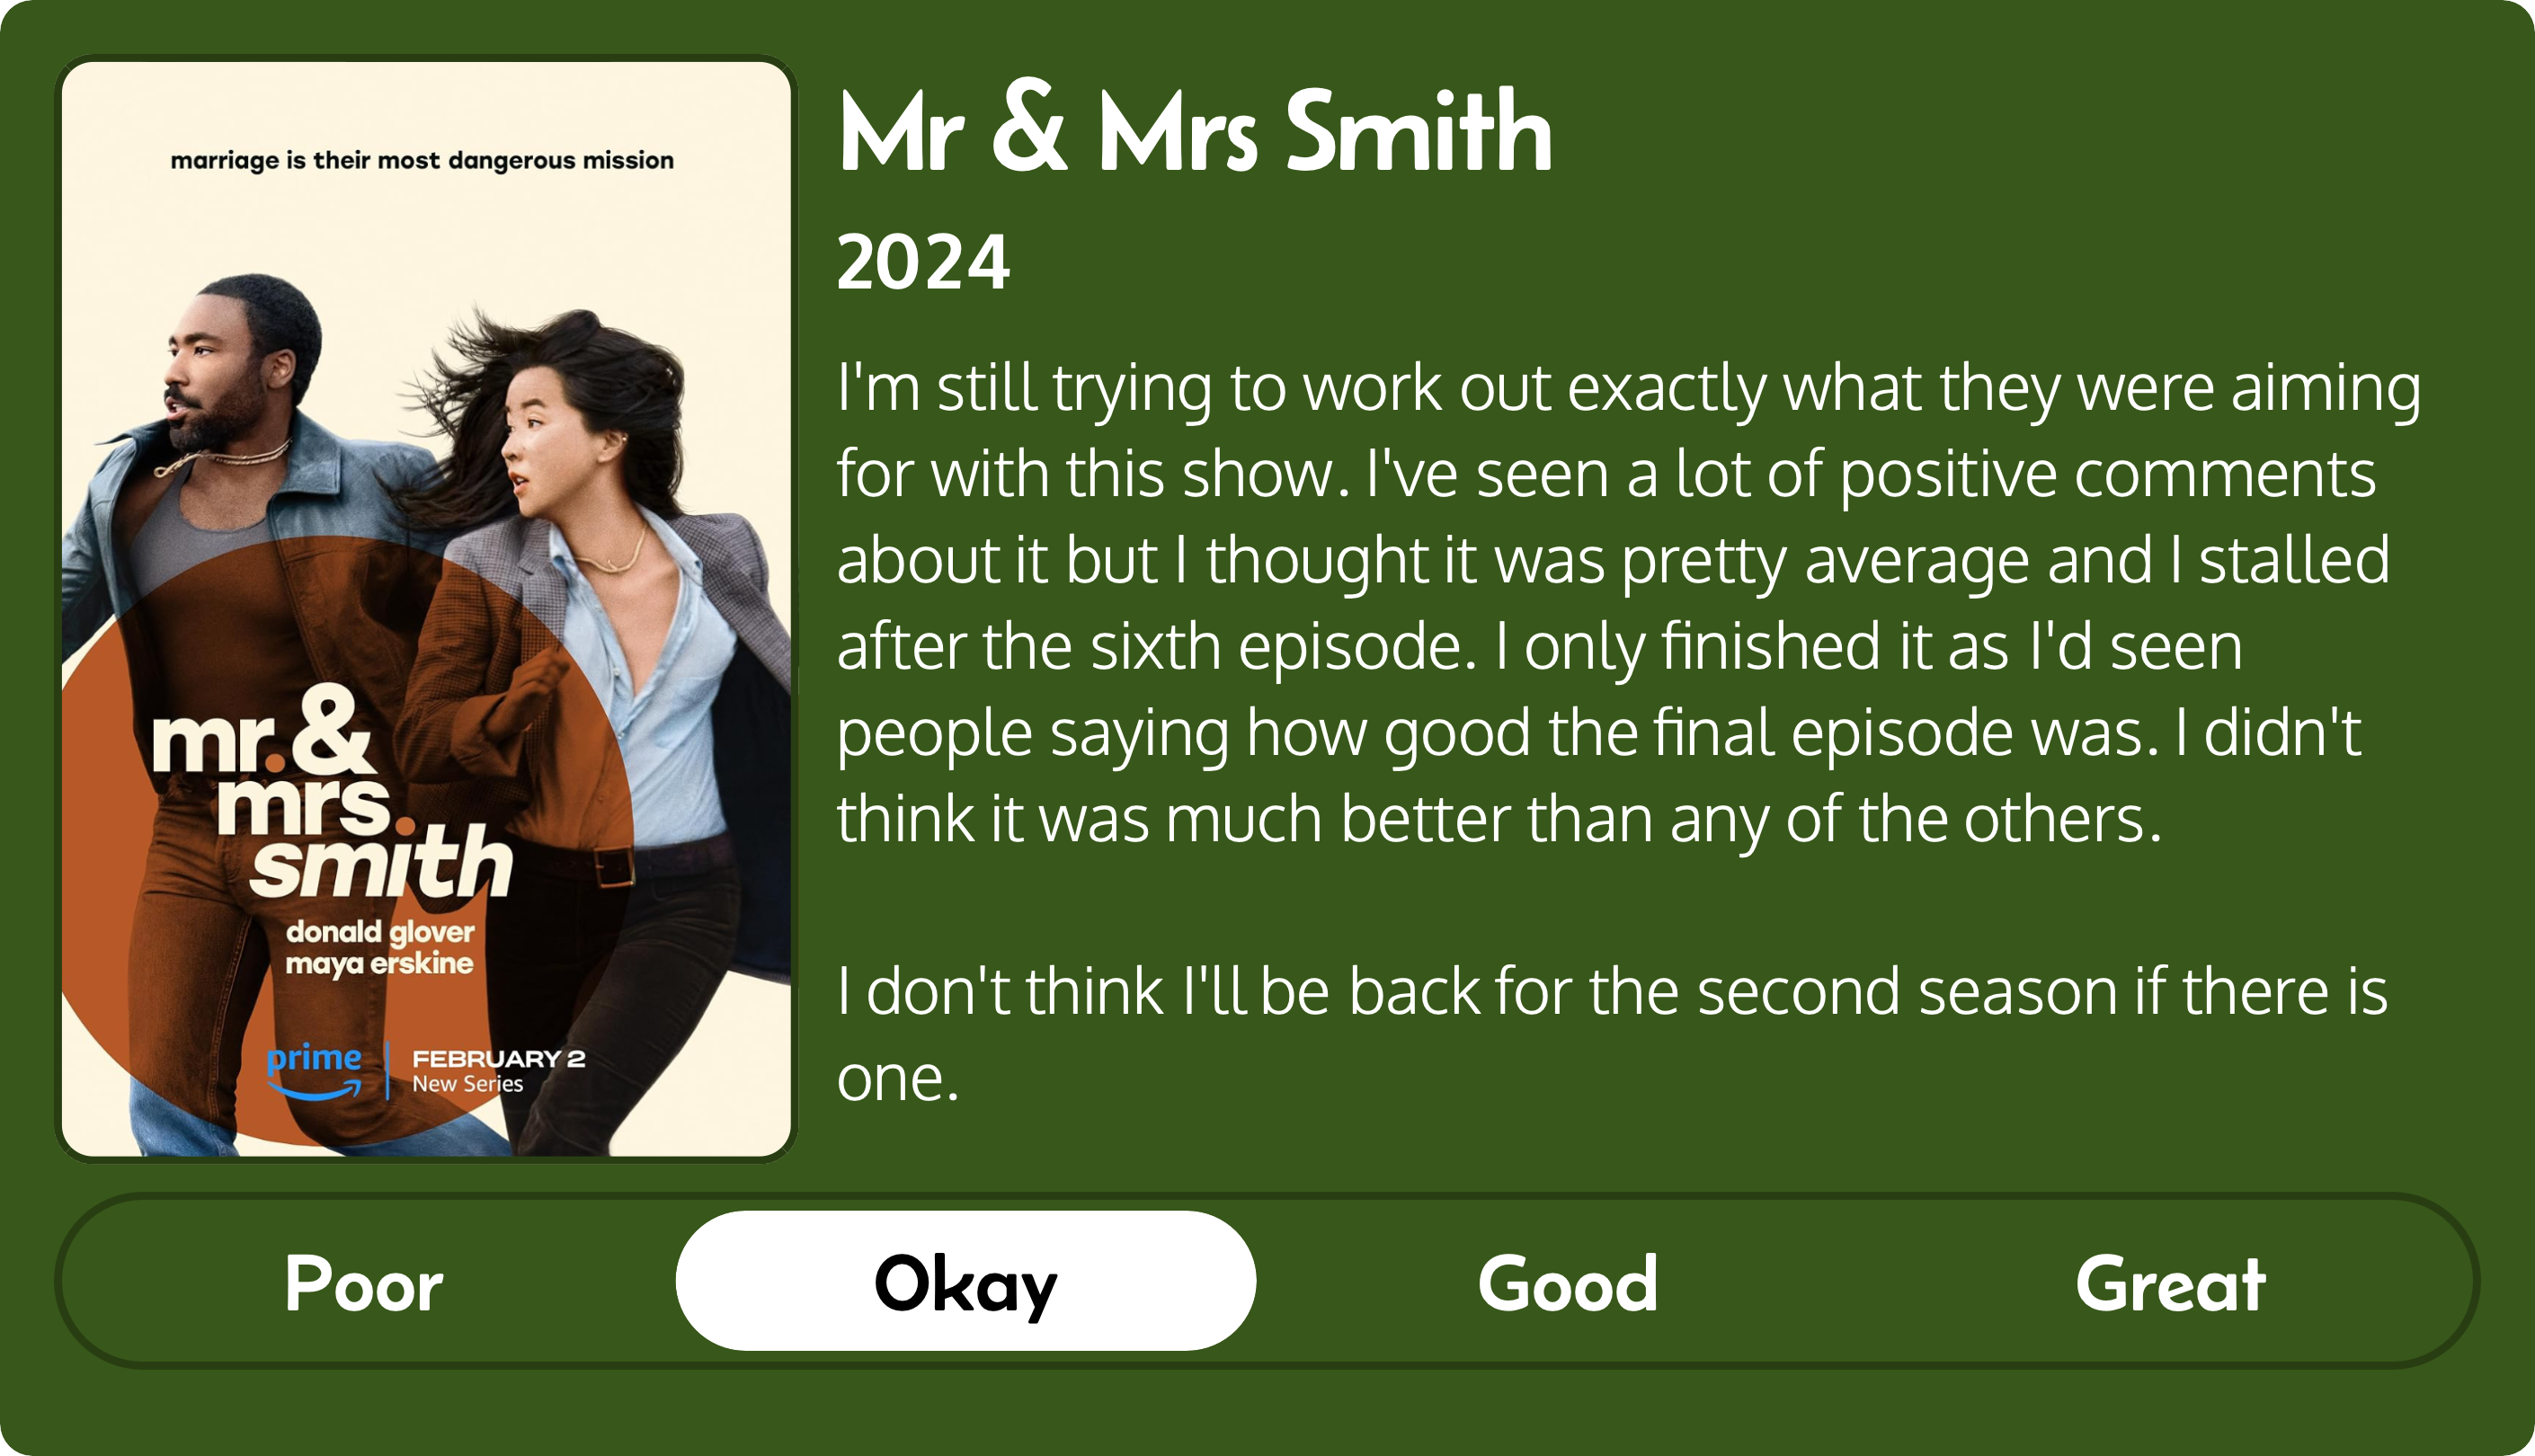 A rectangular image with a review of the Amazon series Mr & Mrs Smith (2024). The left third contains the series poster and the review is in other two-thirds. Across the bottom is a rating of Poor Okay Good Great with Okay selected. The review reads: I'm still trying to work out exactly what they were aiming for with this show. I've seen a lot of positive comments about it but I thought it was pretty average and I stalled after the sixth episode. I only finished it as I'd seen people saying how good the final episode was. I didn't think it was much better than any of the others. I don't think I'll be back for the second season if there is one.